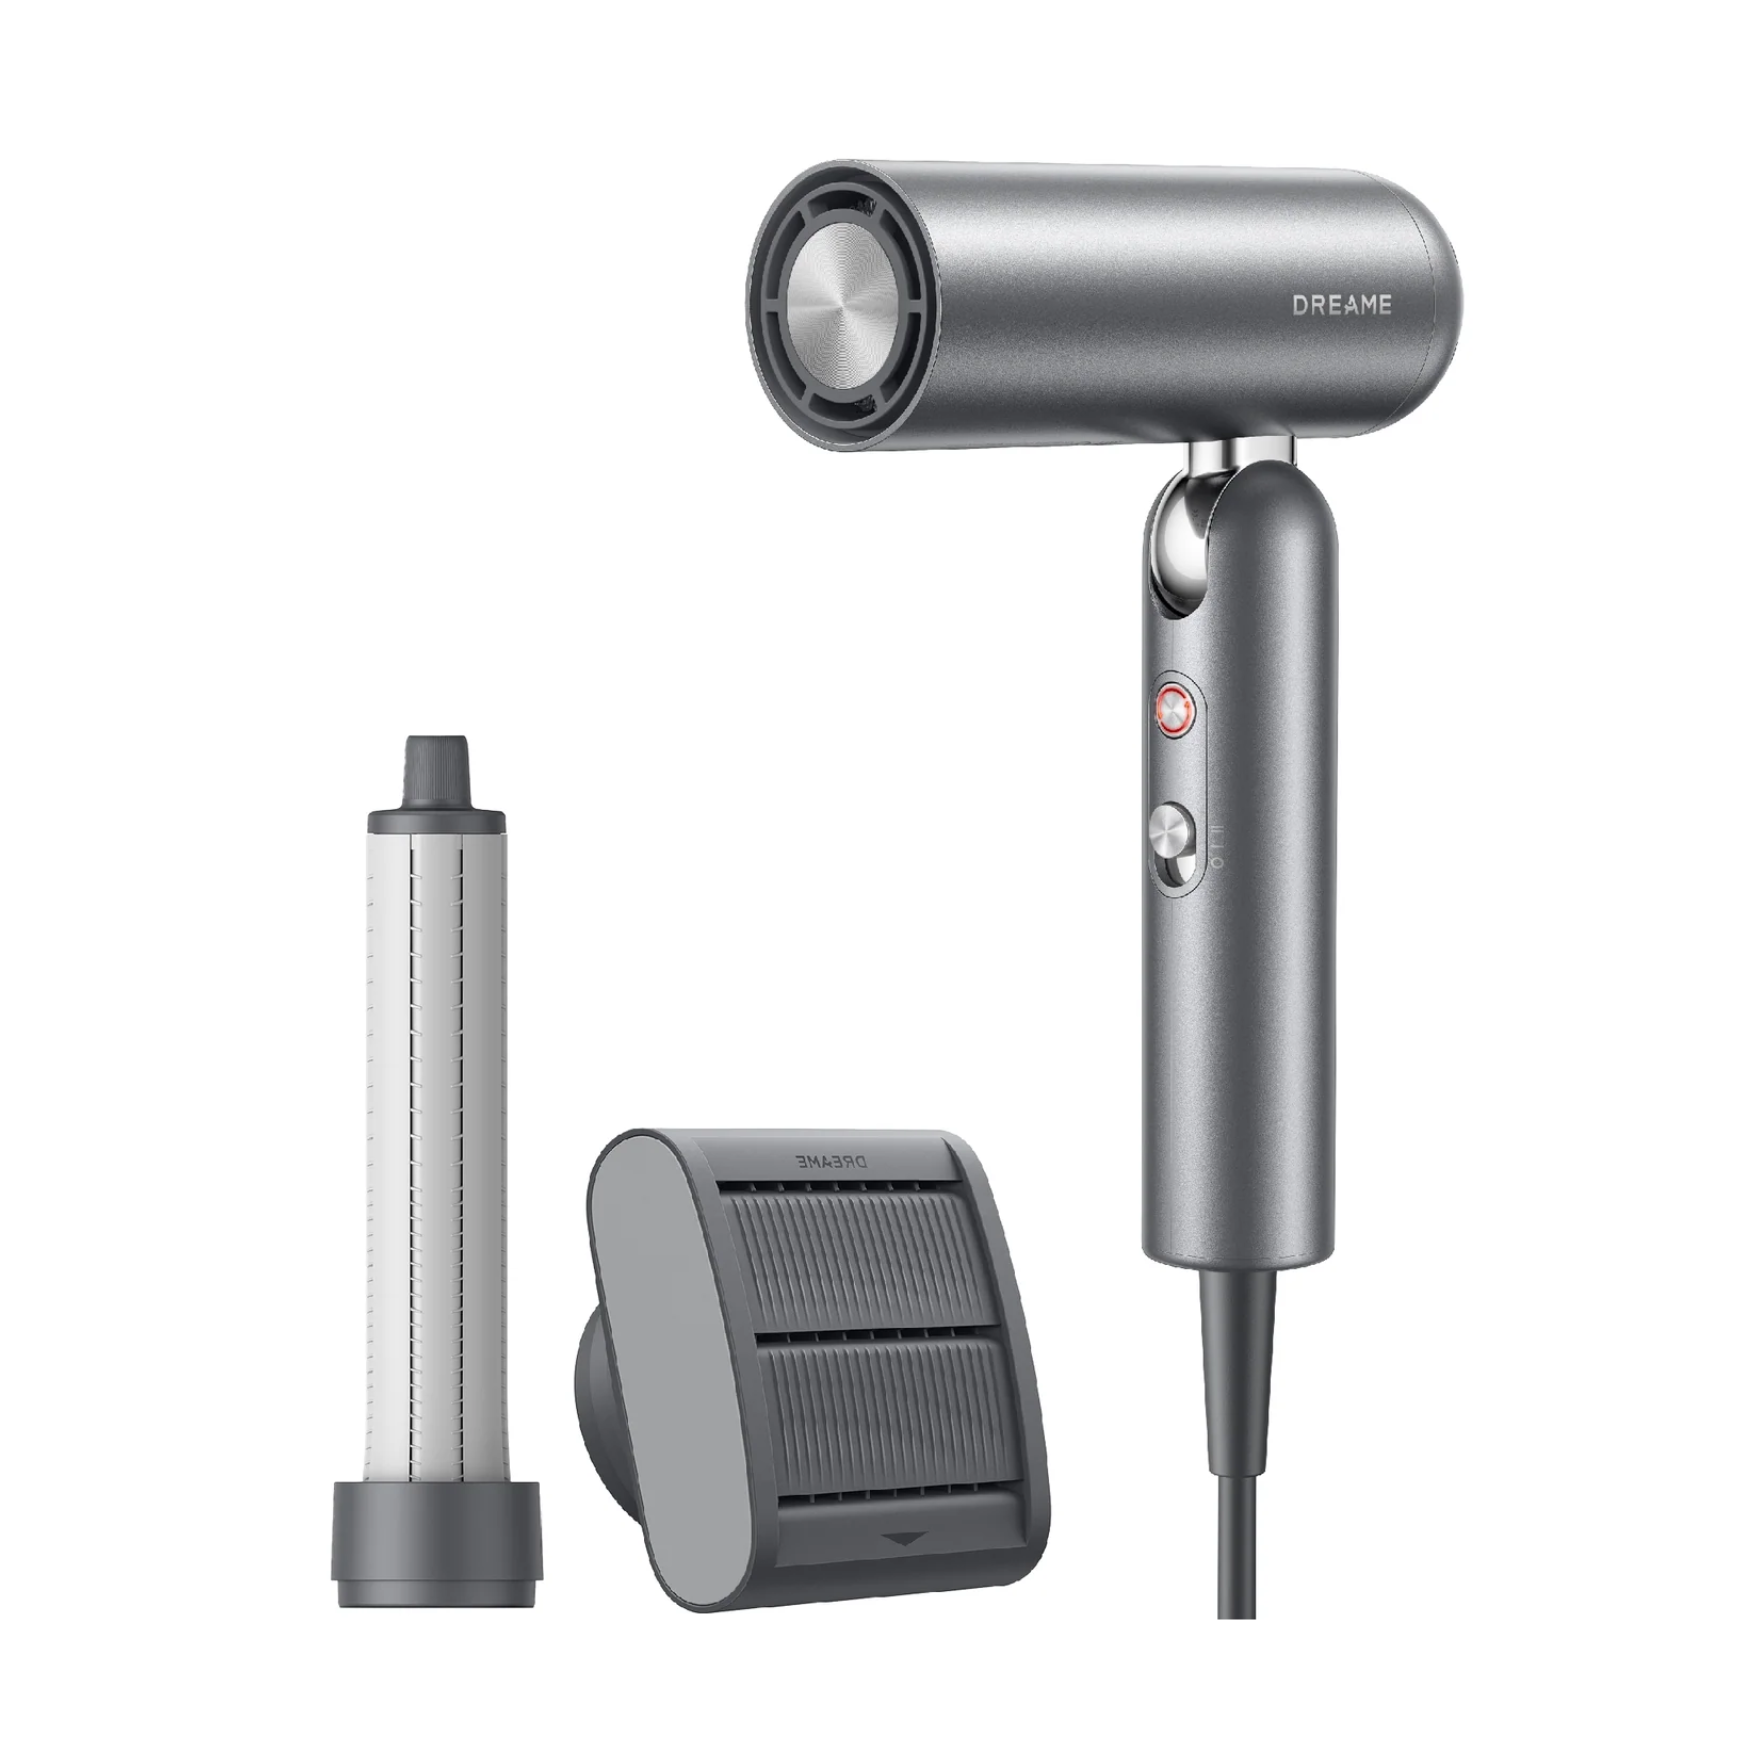 Dreame Pocket Hair Dryer Space Gray